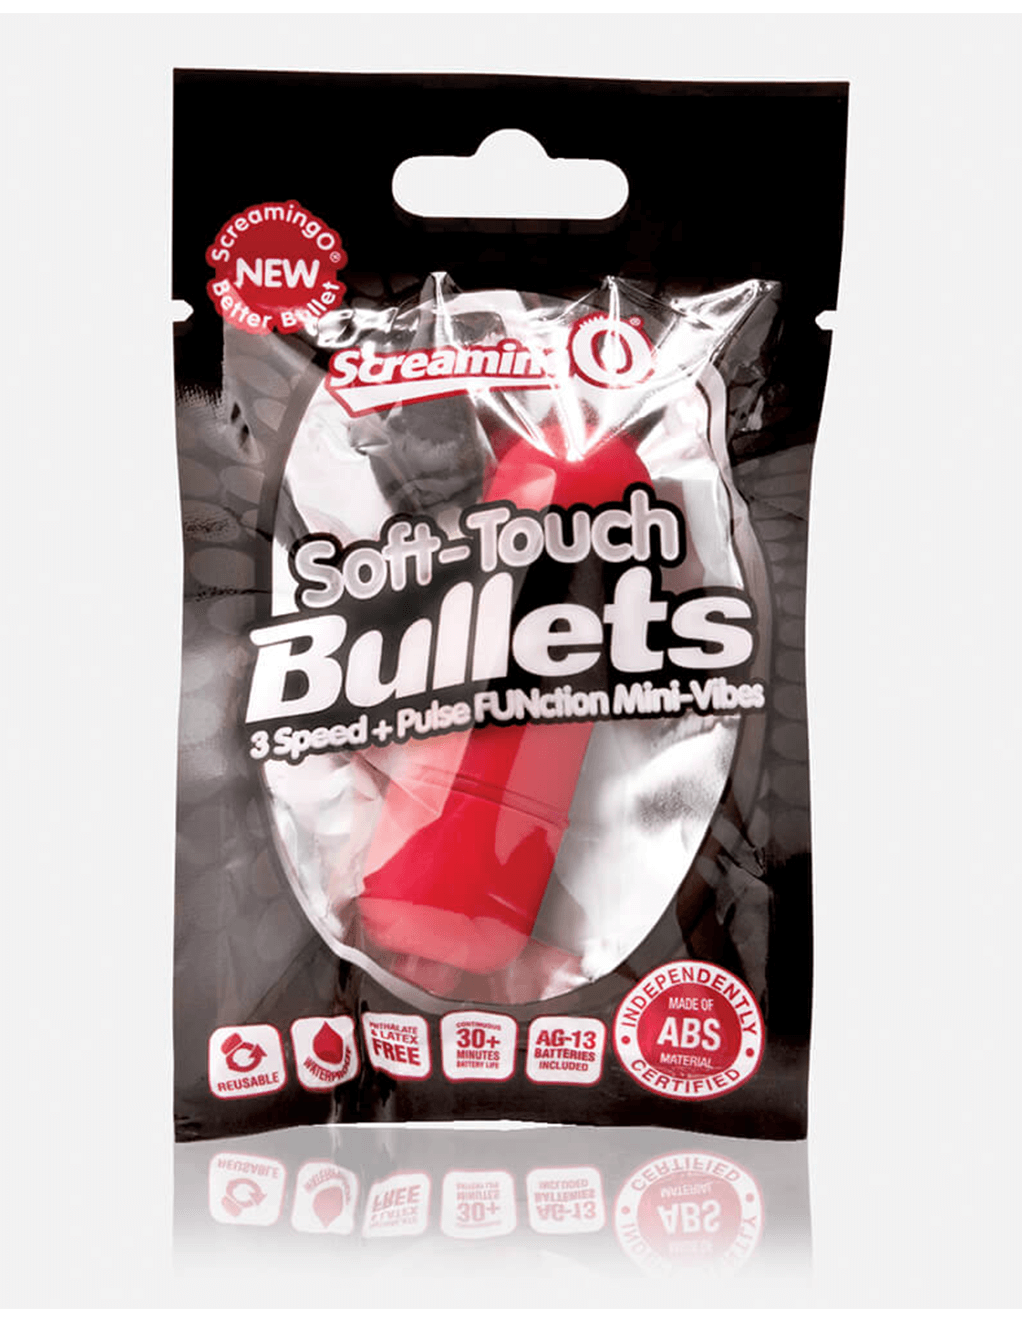 Screaming O 3 Speed Soft-Touch Bullet - Package